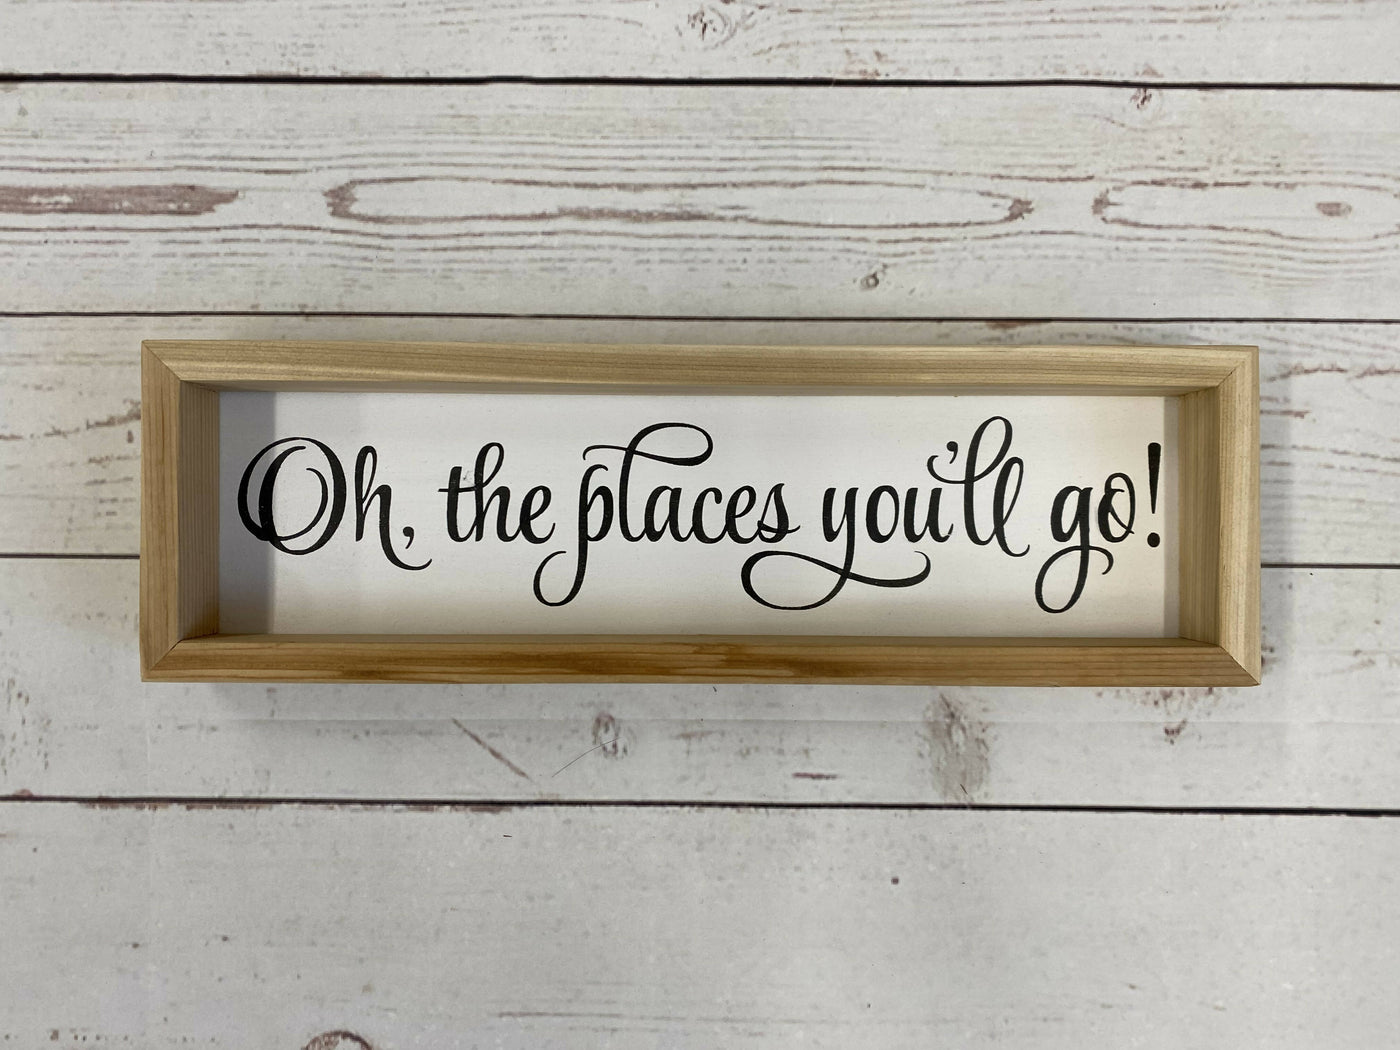 Oh the places you’ll go! Sign